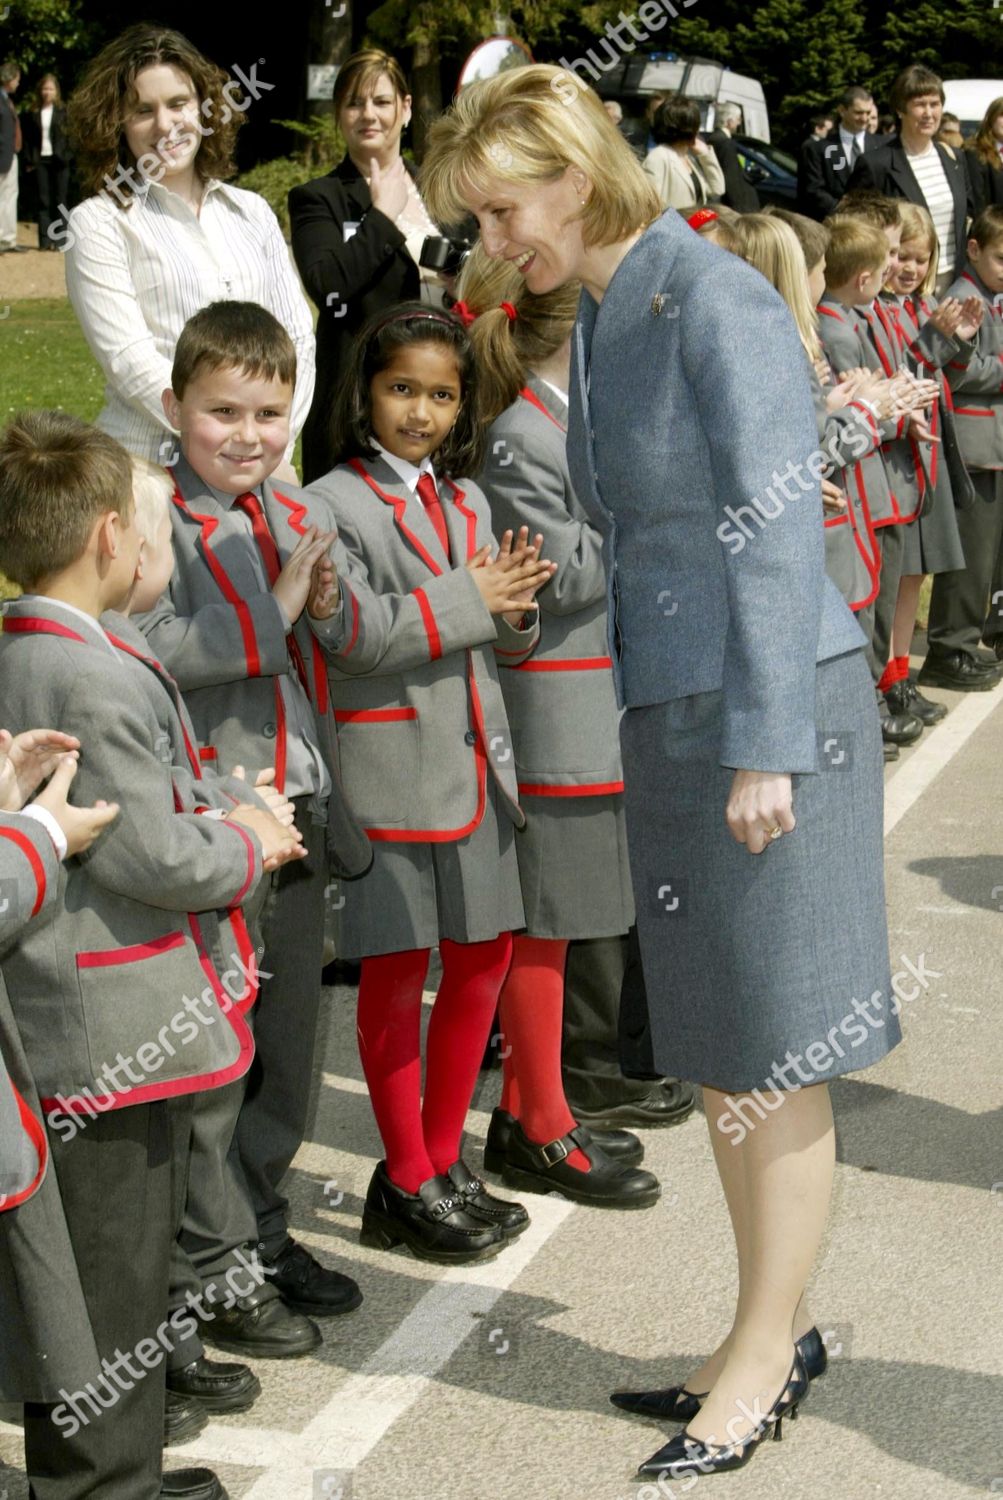 prince-edward-and-sophie-countess-of-wessex-visiting-rougemont-school-newport-wales-britain-shutterstock-editorial-415508a.jpg